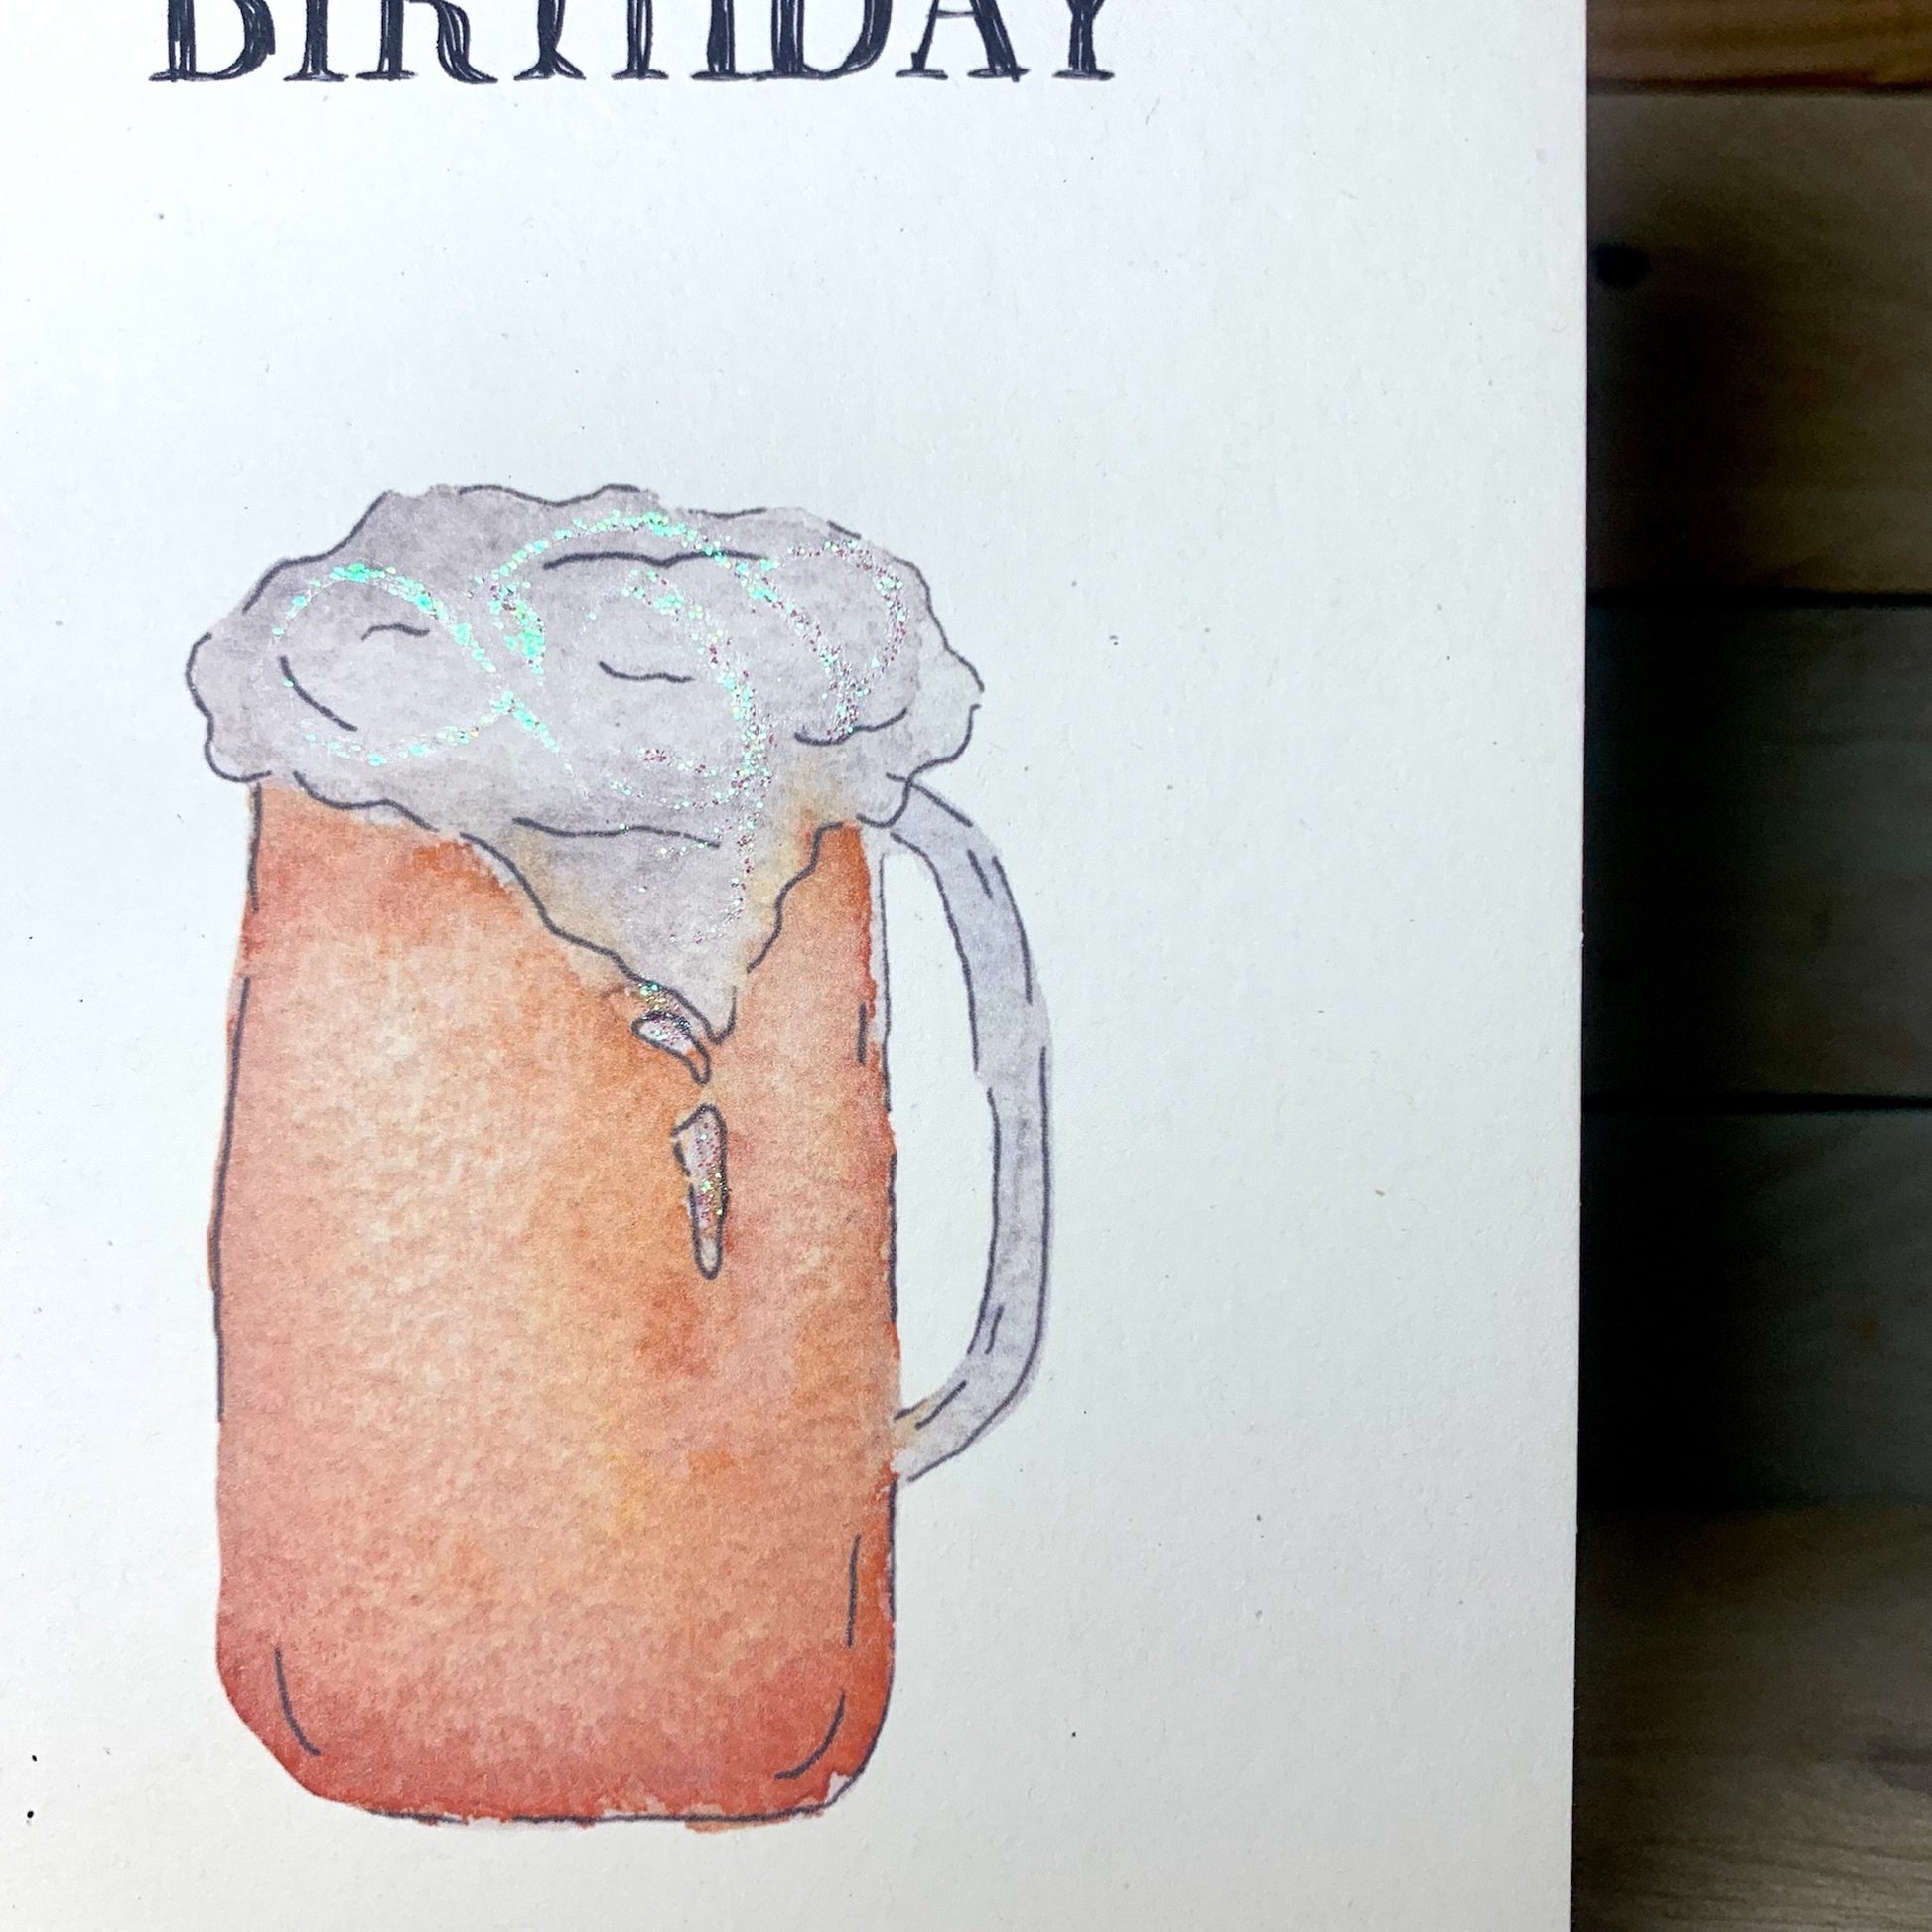 I'll Have a Pint Please Beer Birthday card - Arty Bee Designs 